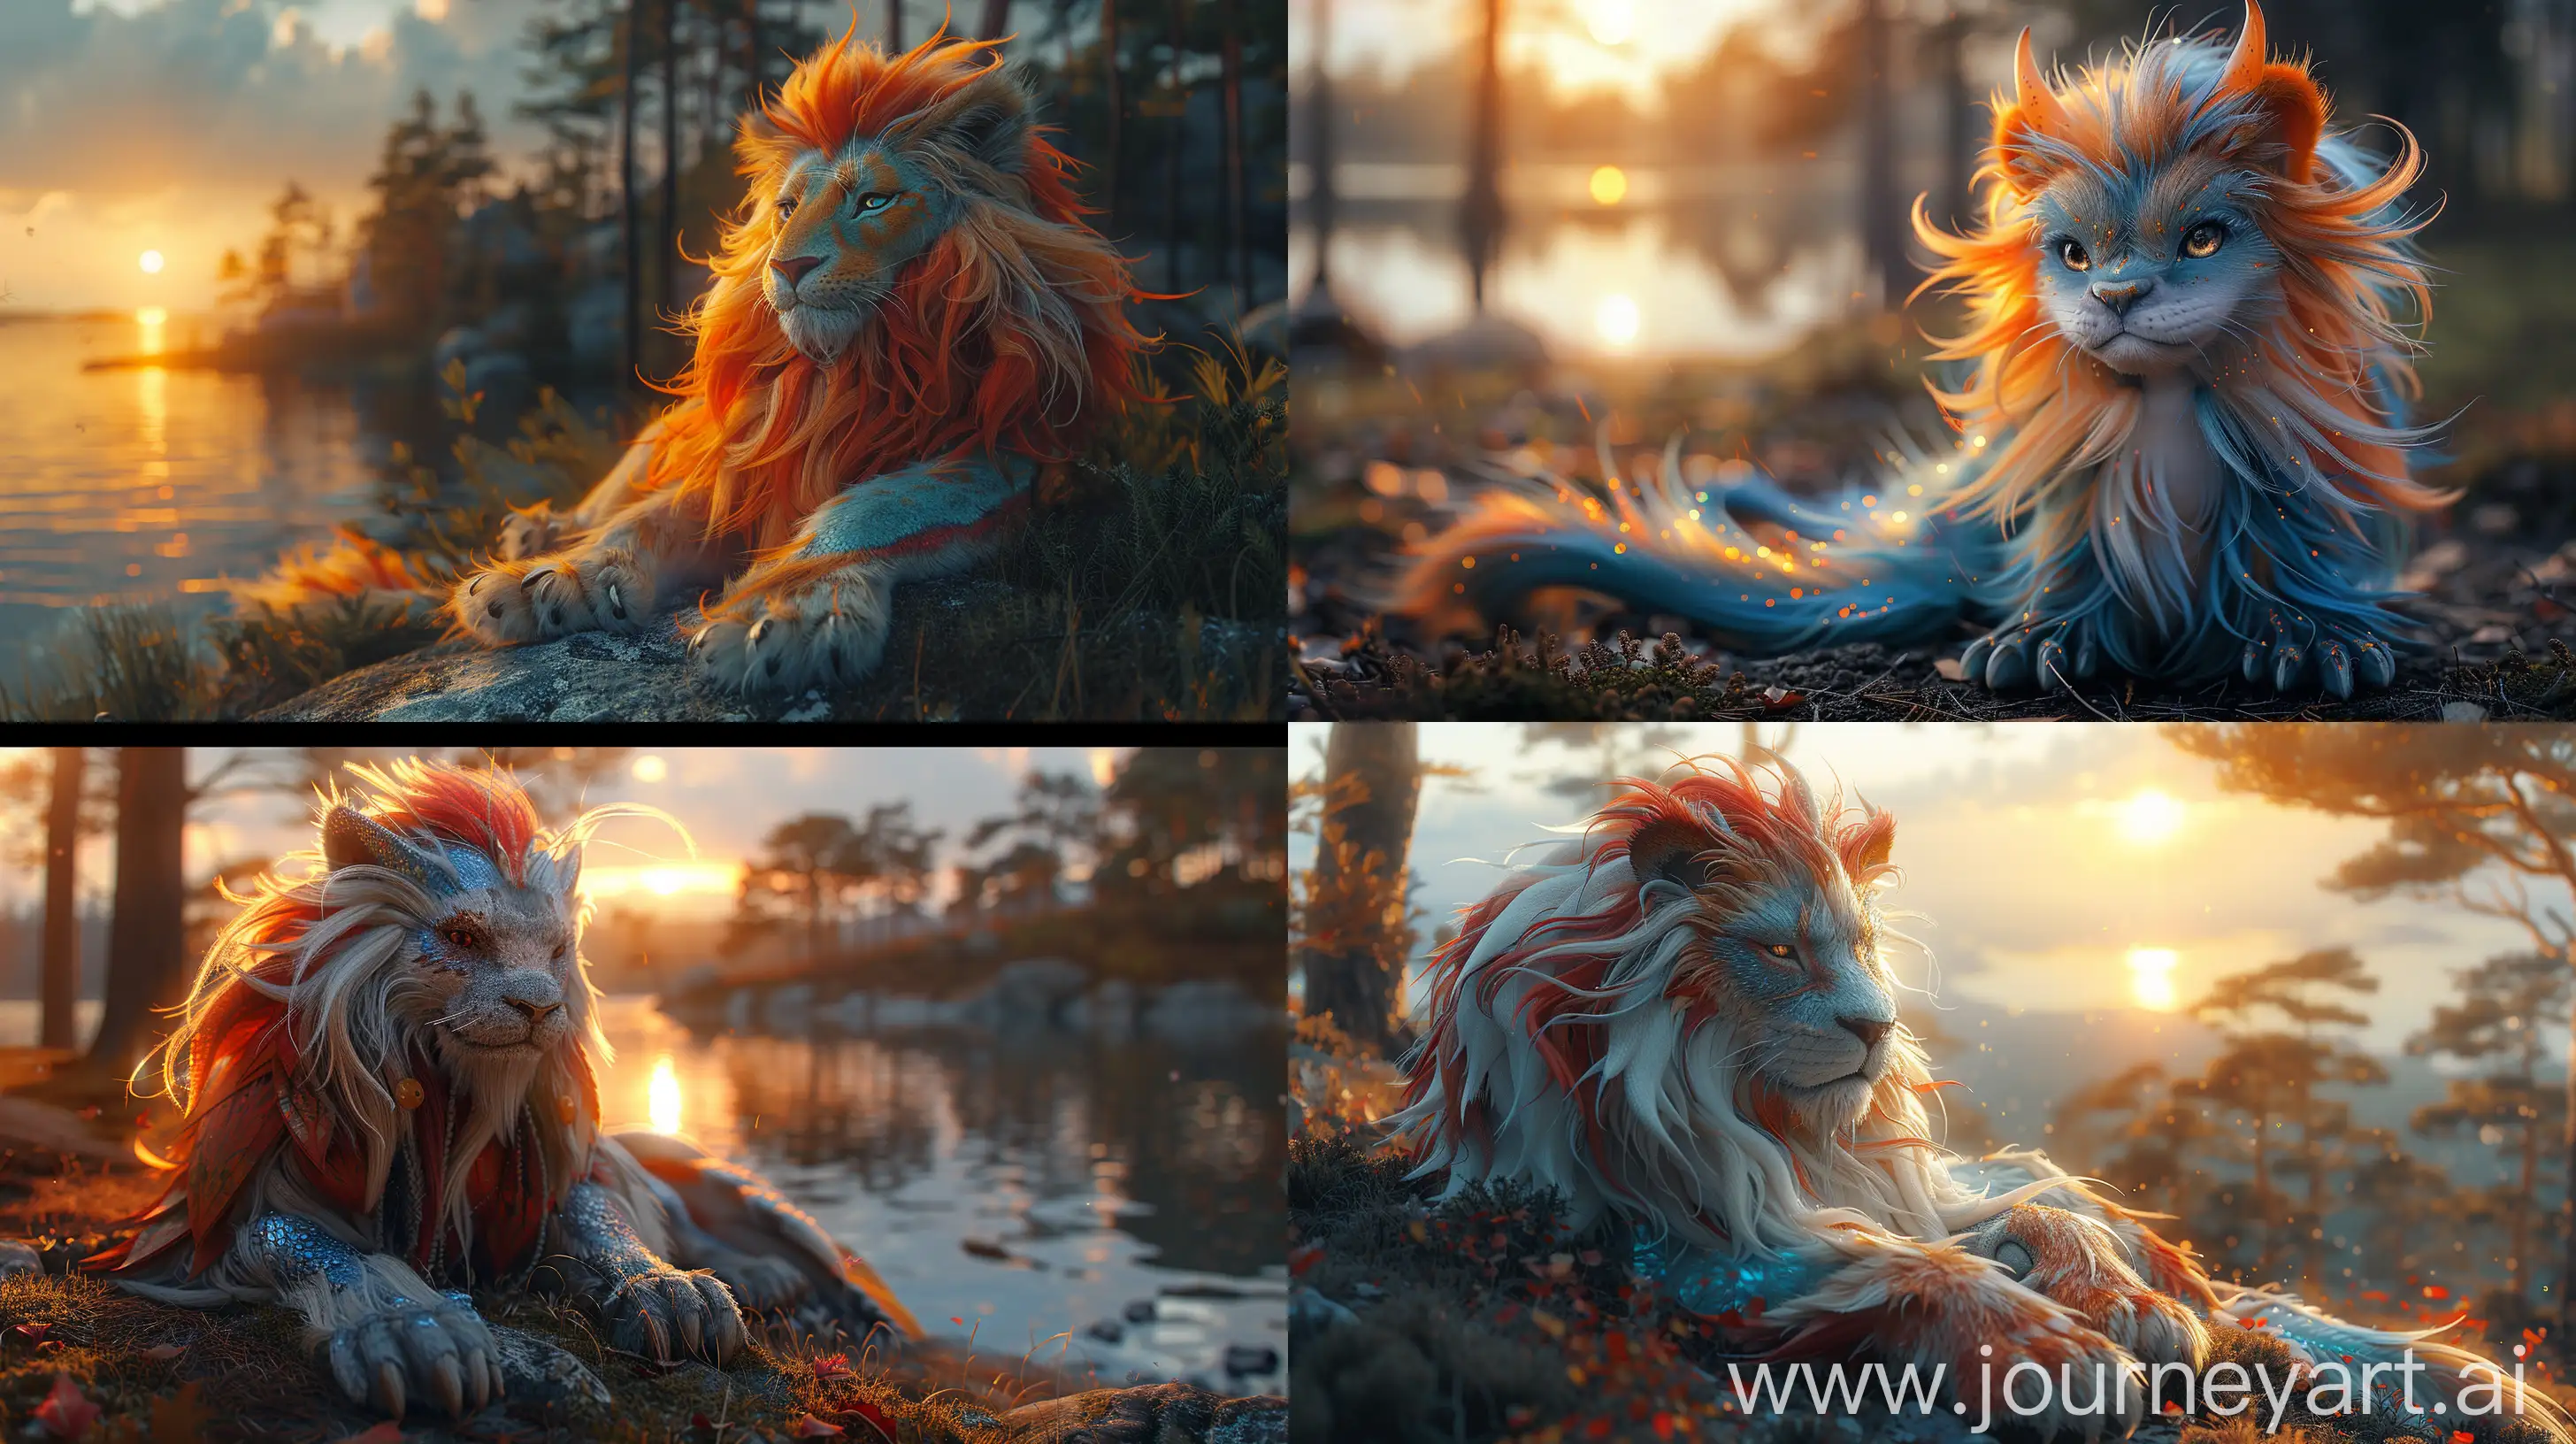 Colorful-Fantasy-Dragon-Lion-Posing-in-Enchanted-Forest-at-Sunset